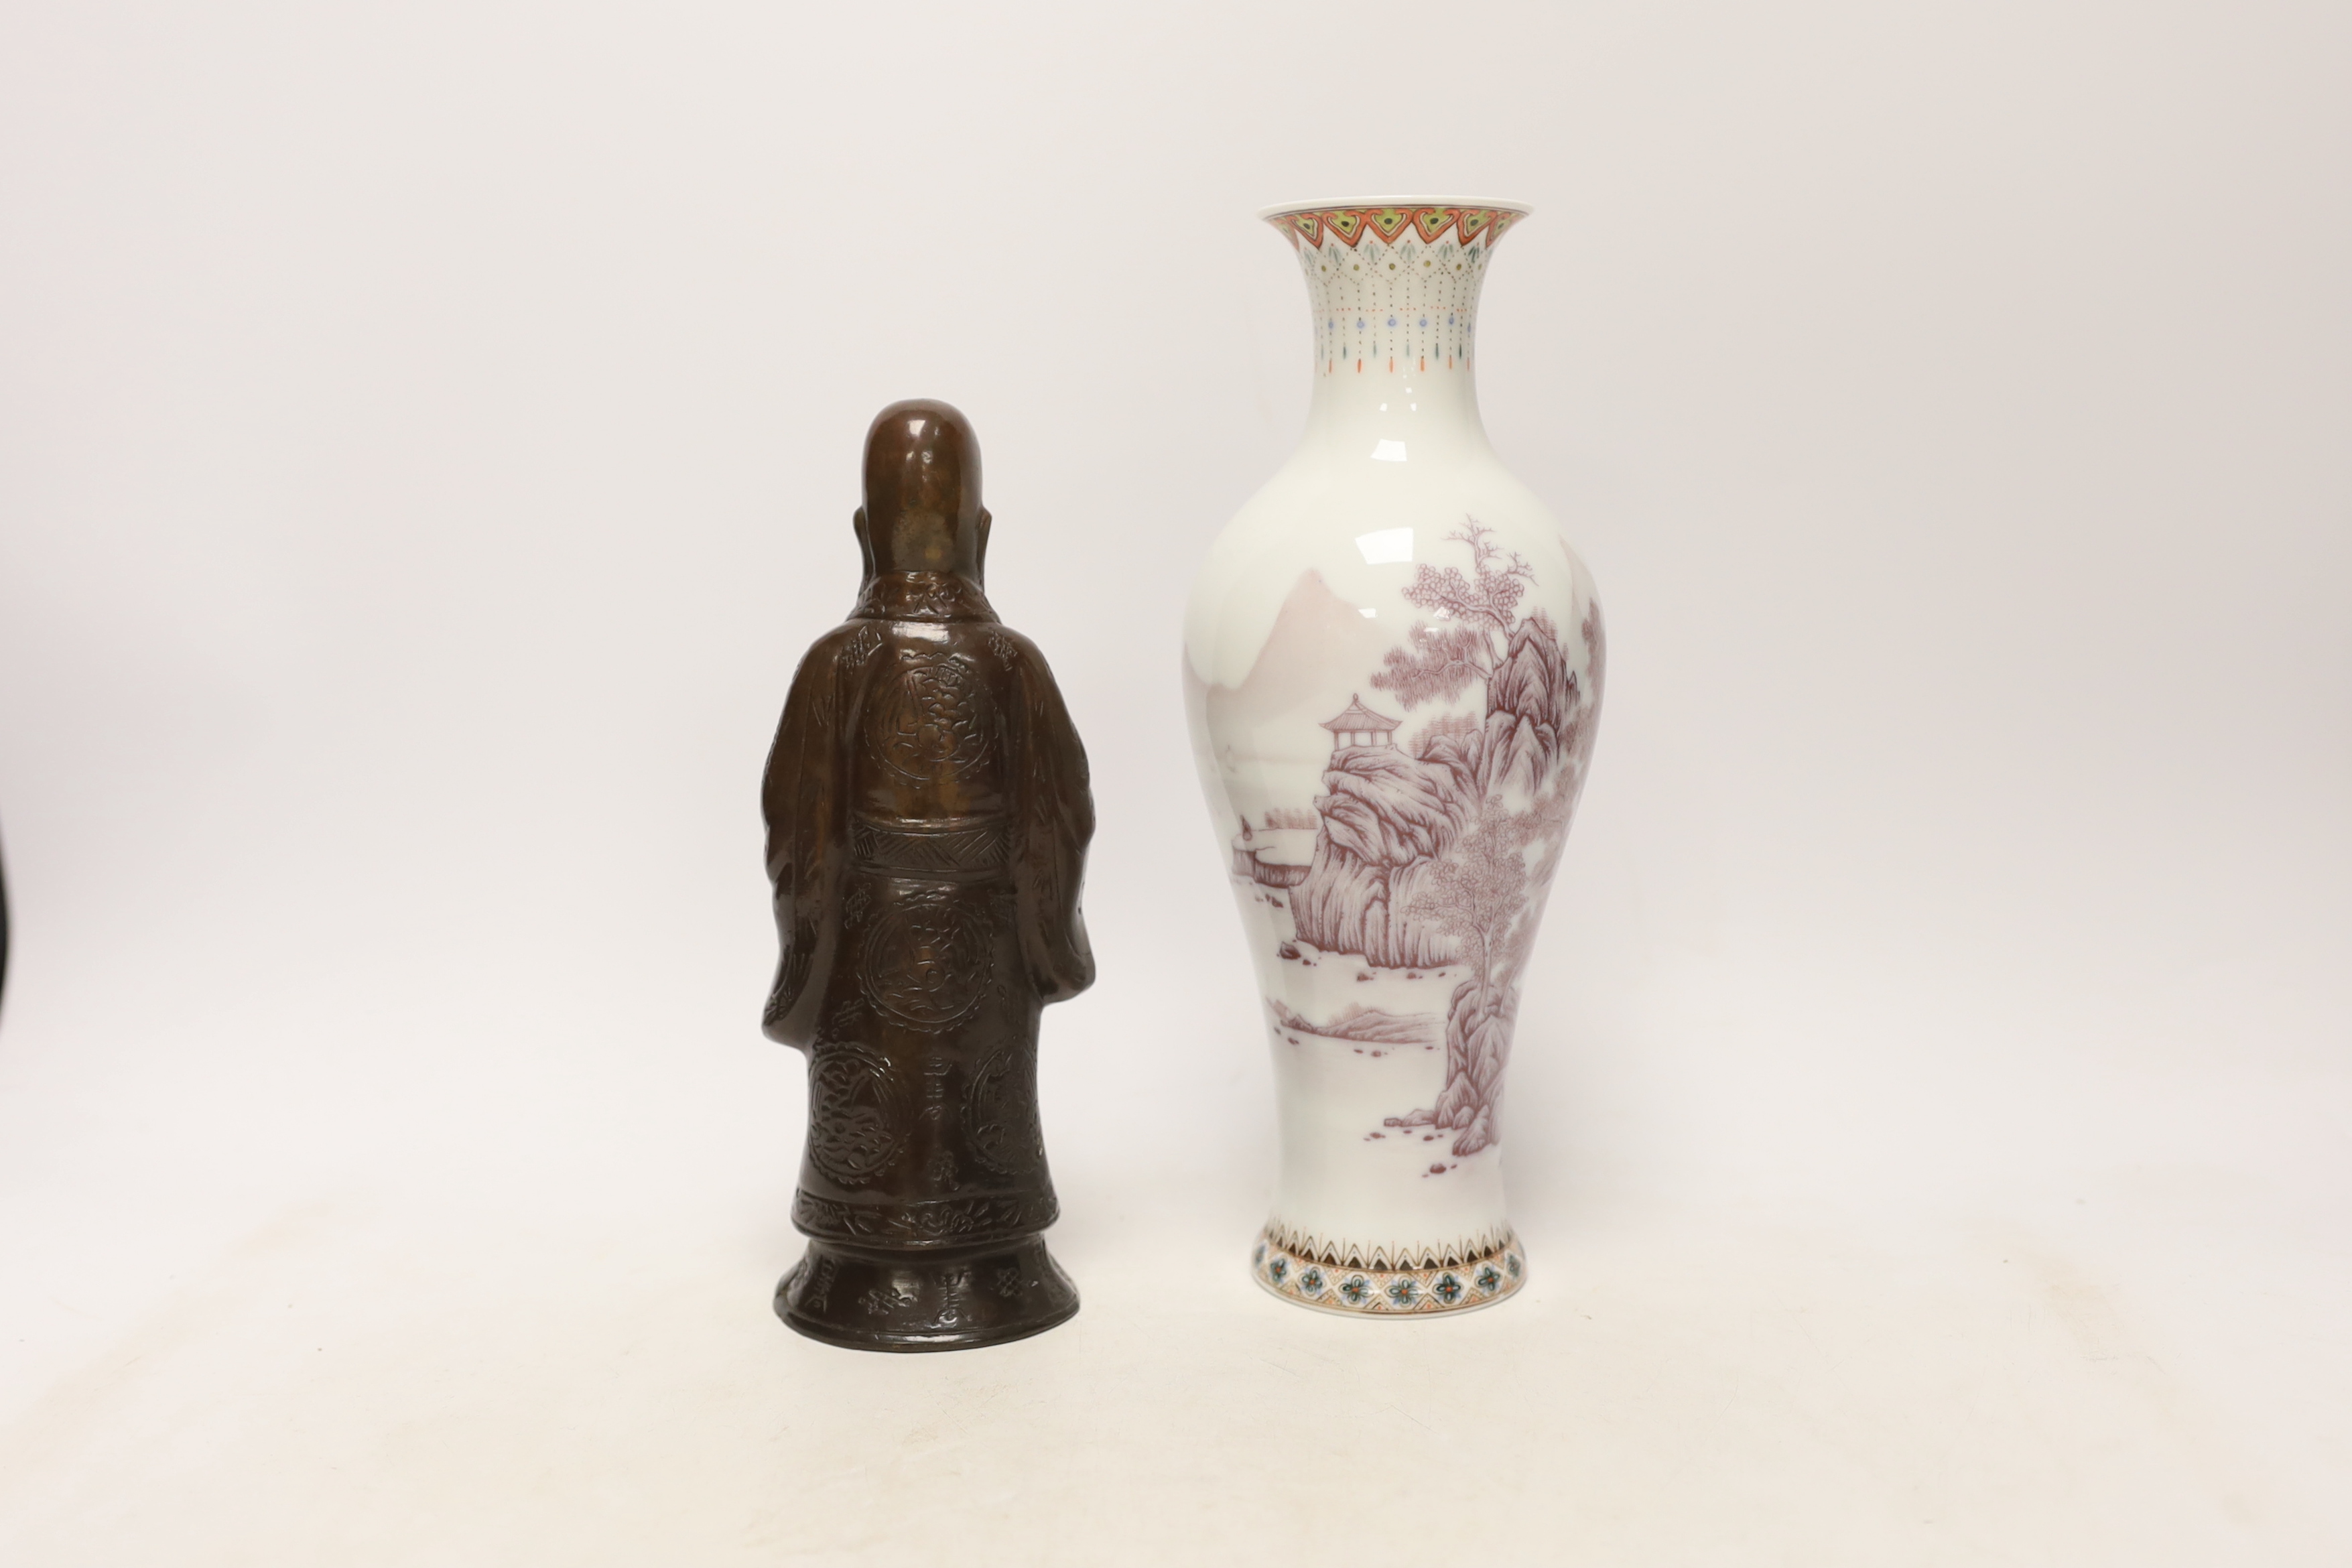 A Chinese bronze figure of Shou Lao and a Chinese Republic period vase, 1991, largest 26cm high